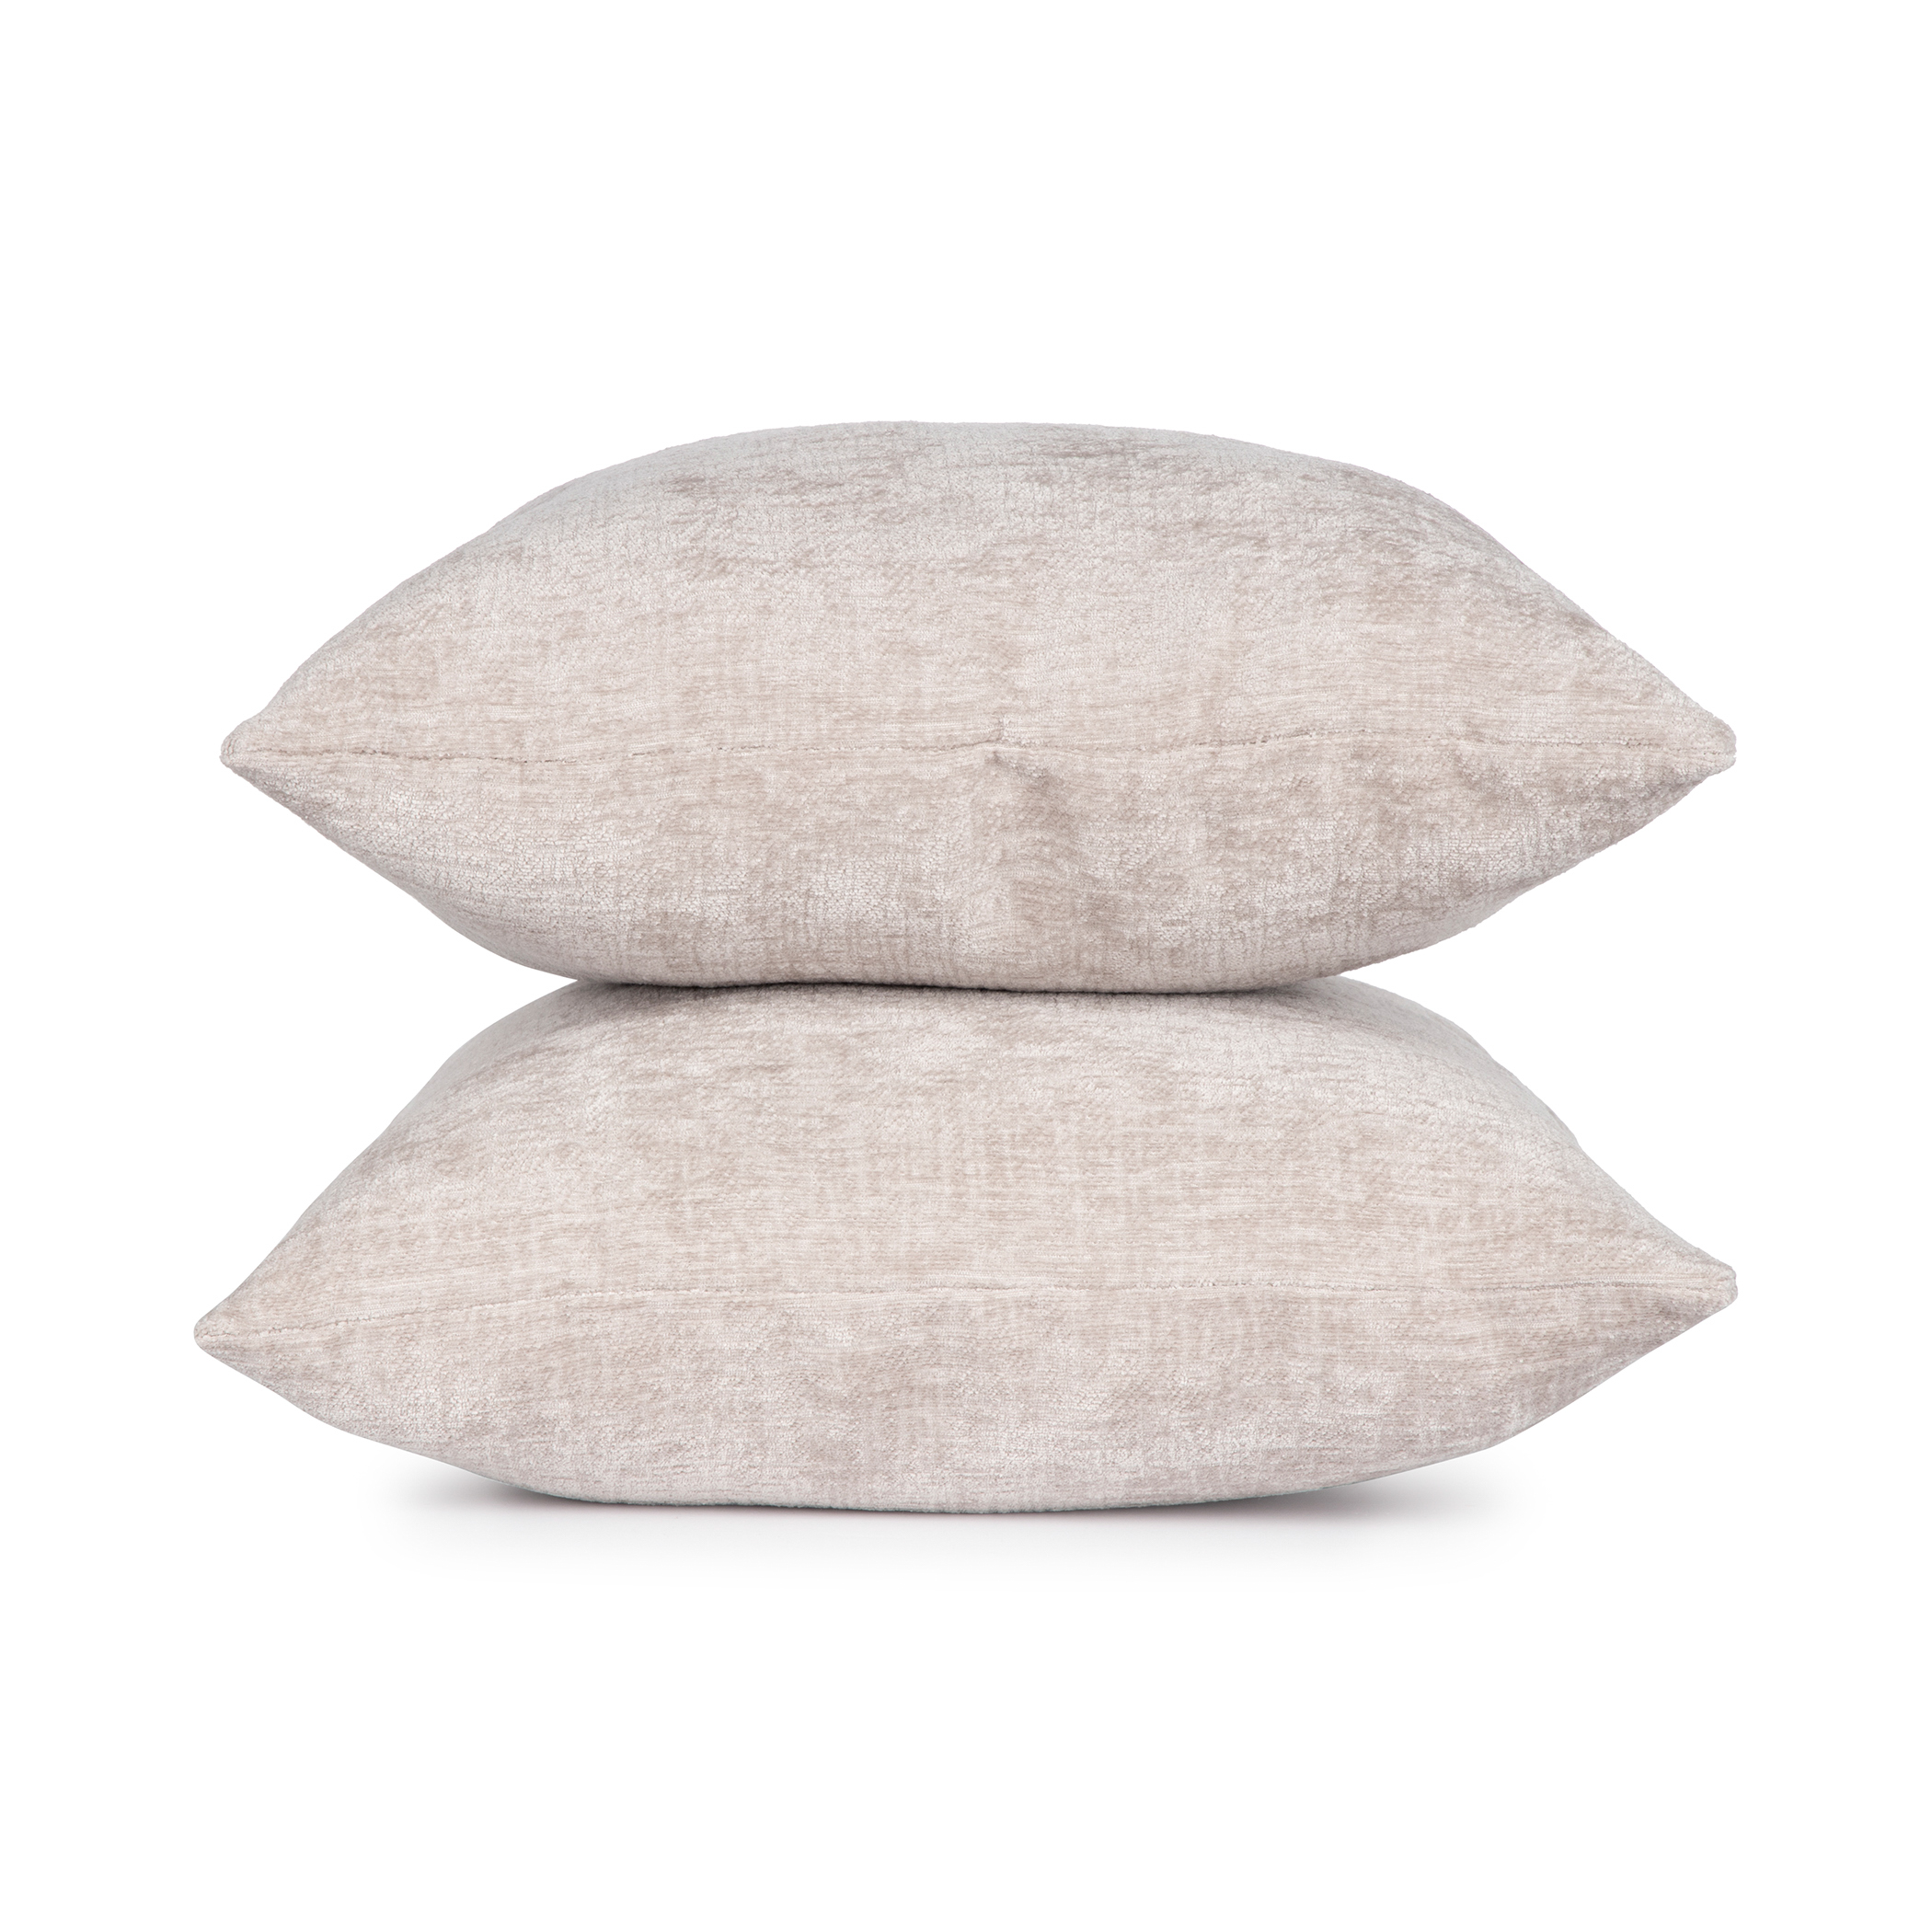 Mainstays Chenille Decorative Square Throw Pillow, 18" x 18", Gray Pumice, 2 Pack - image 4 of 5